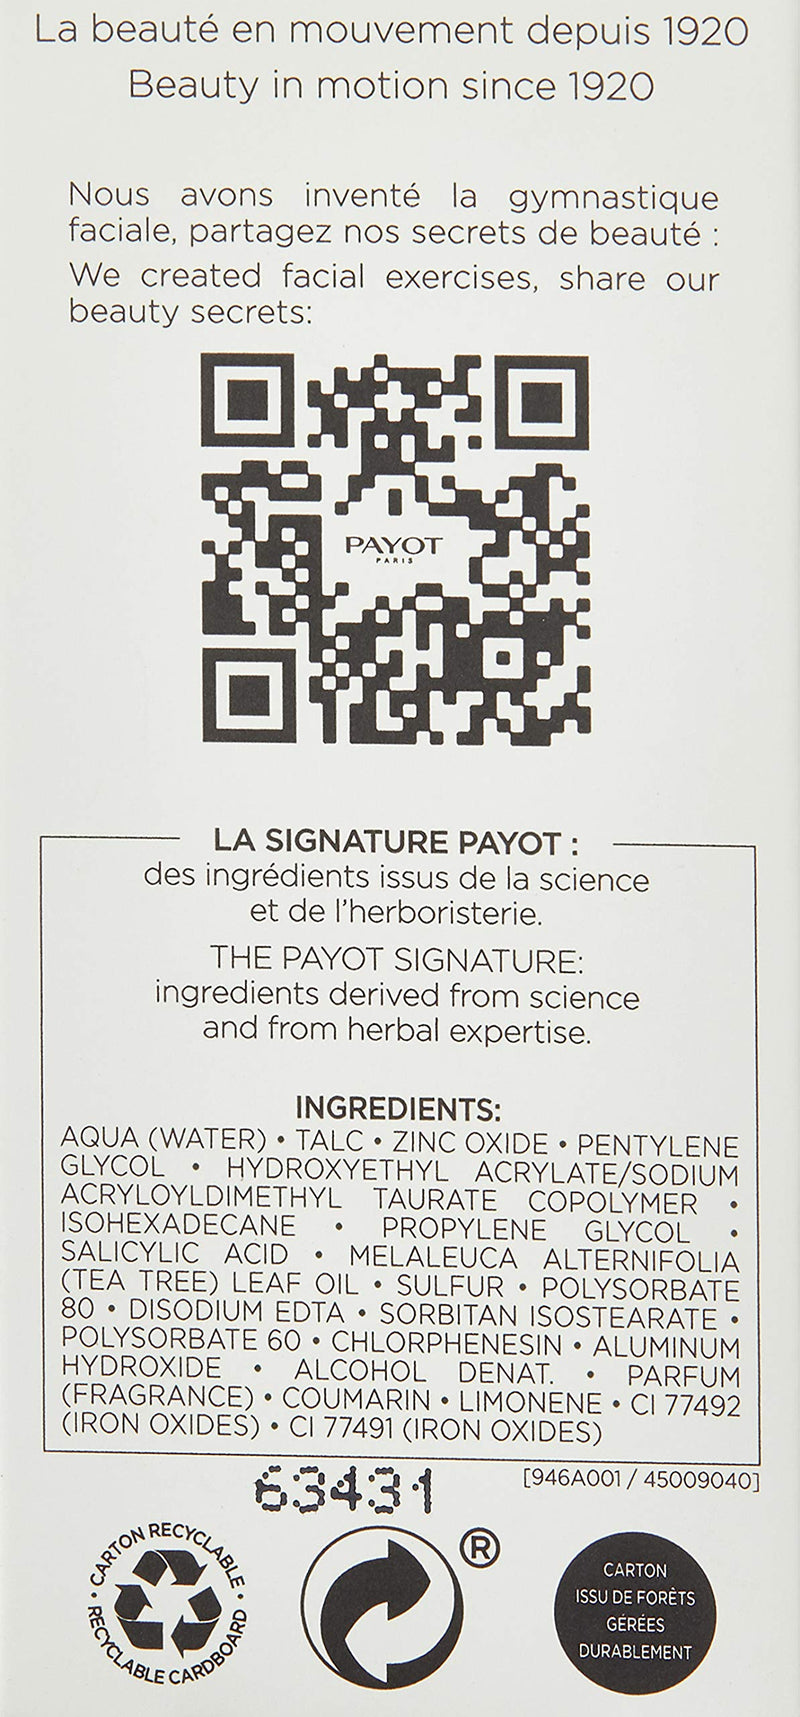 [Australia] - PAYOT PV P√£te Grise Speciale 5 Tube 15 ml 